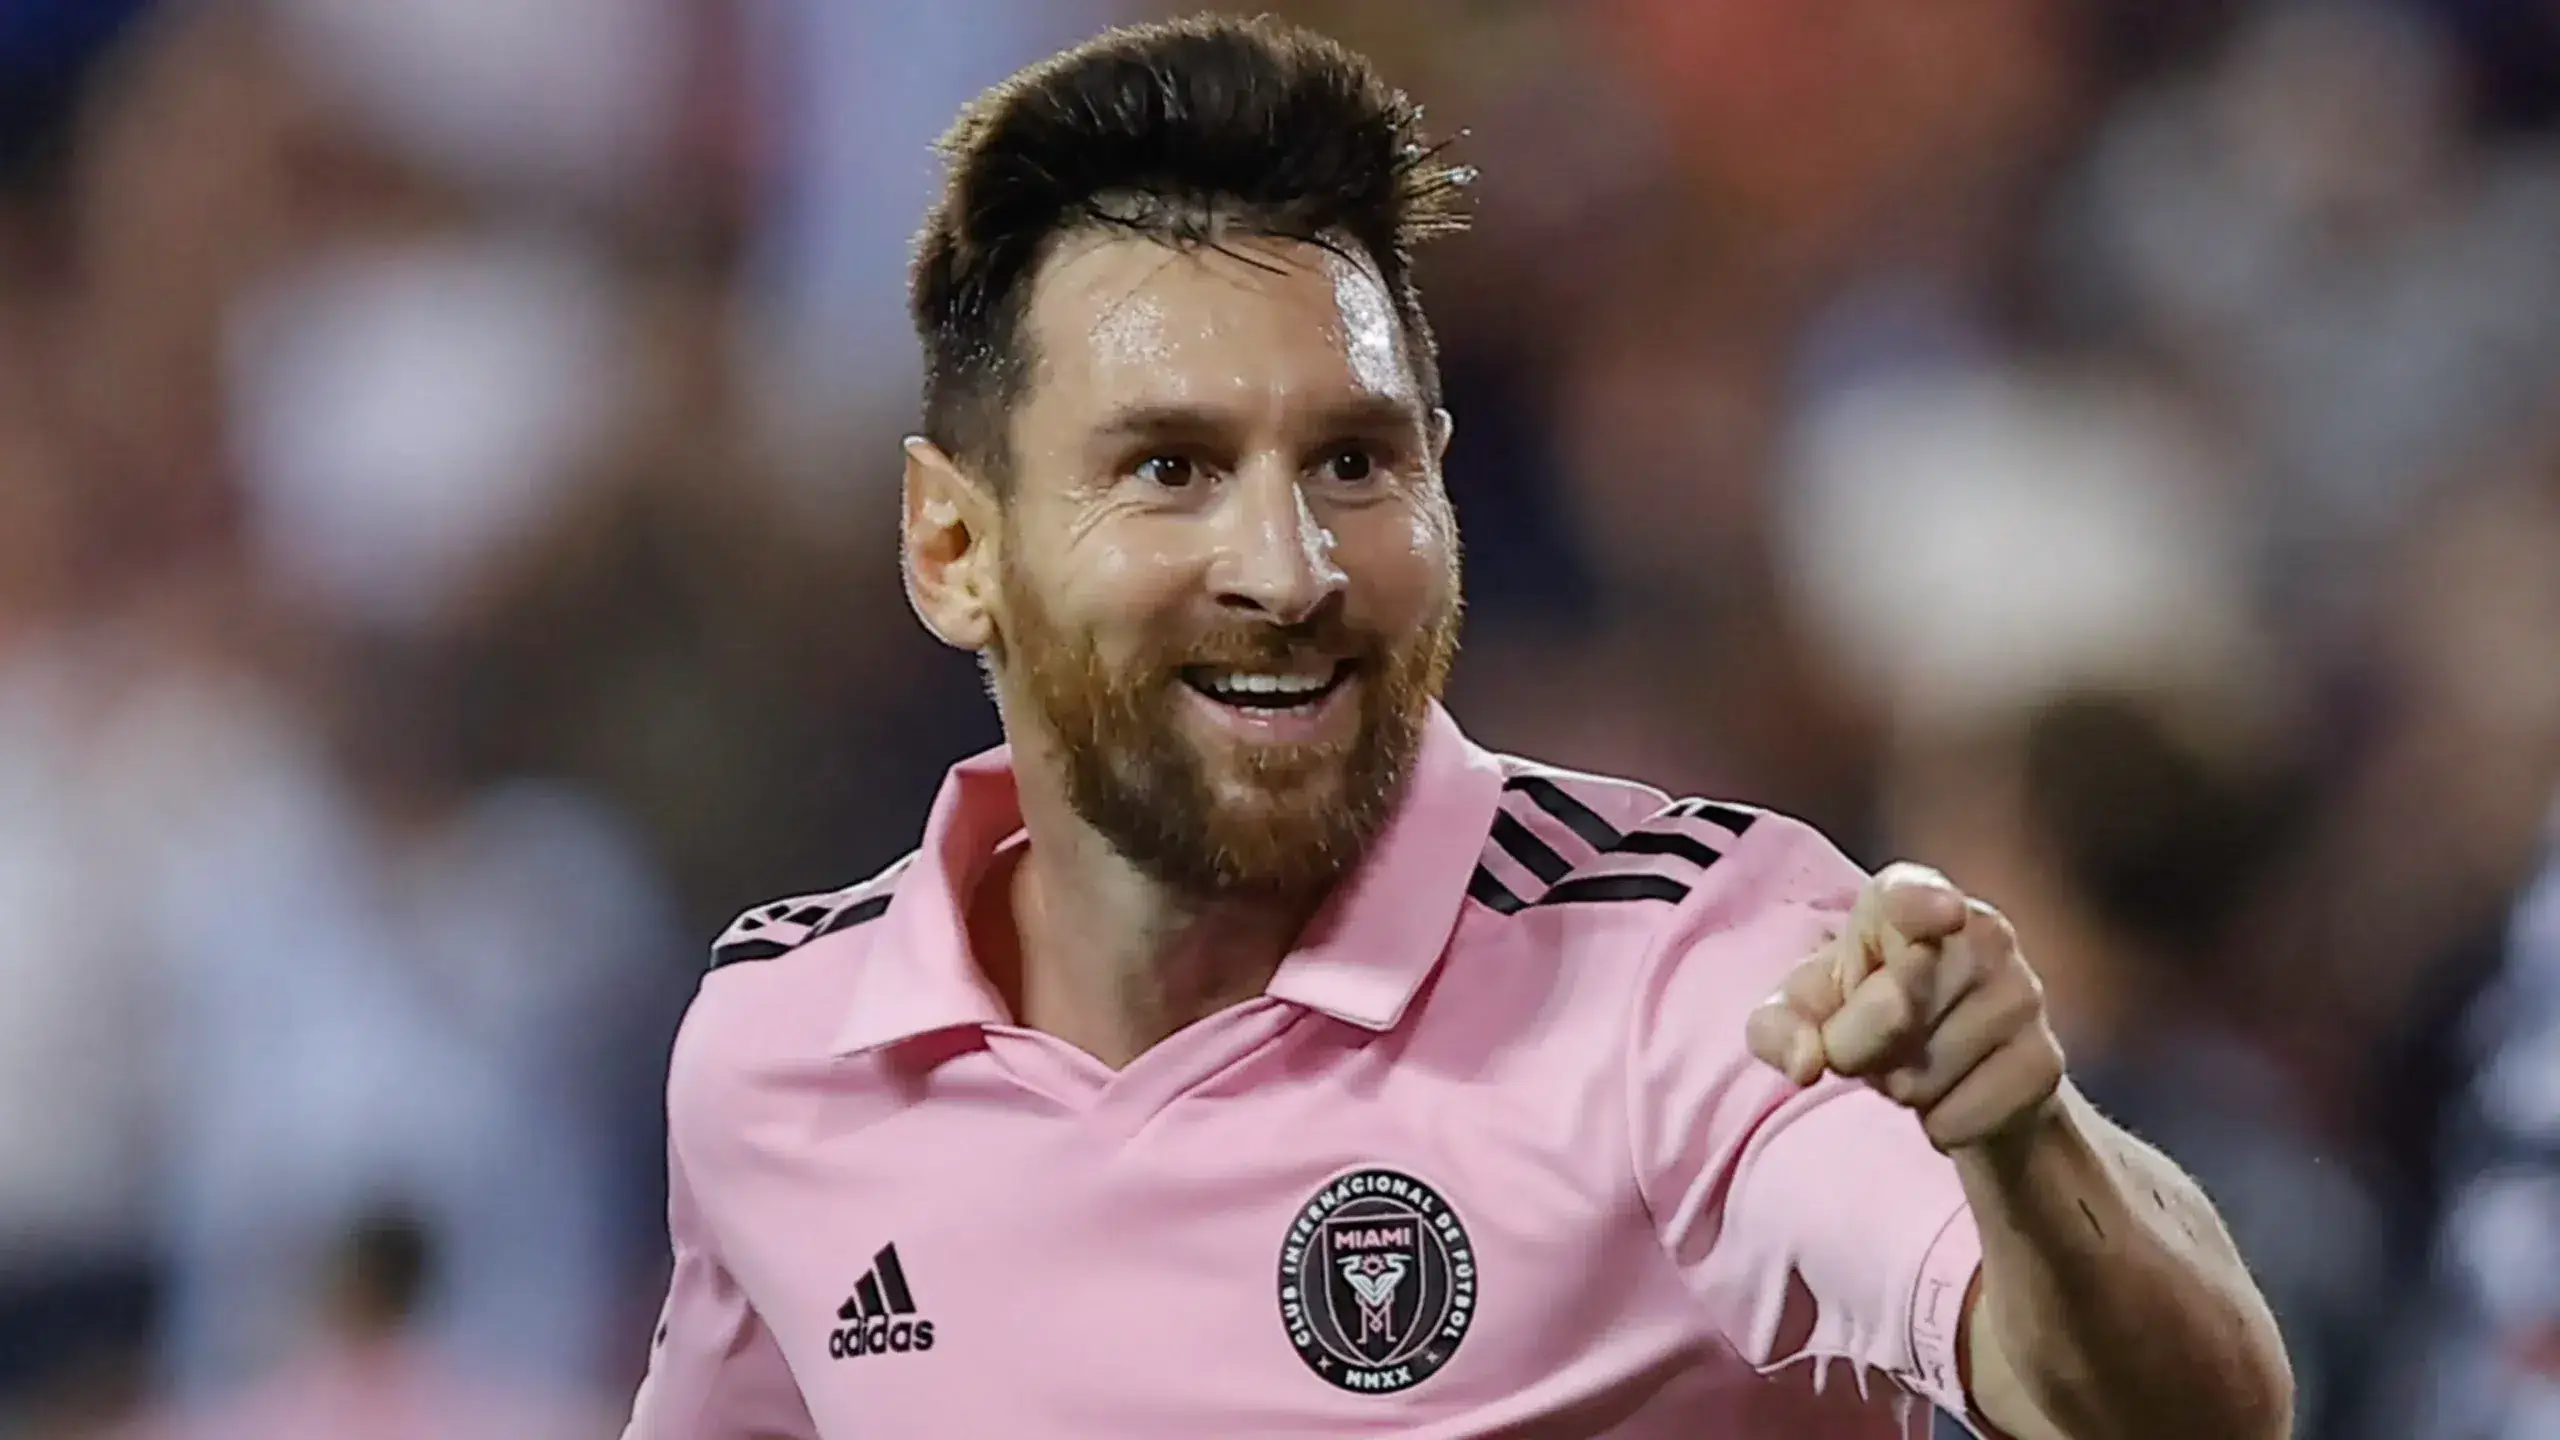 FC Barcelona's Messi agent recommends talent from River Plate
	

